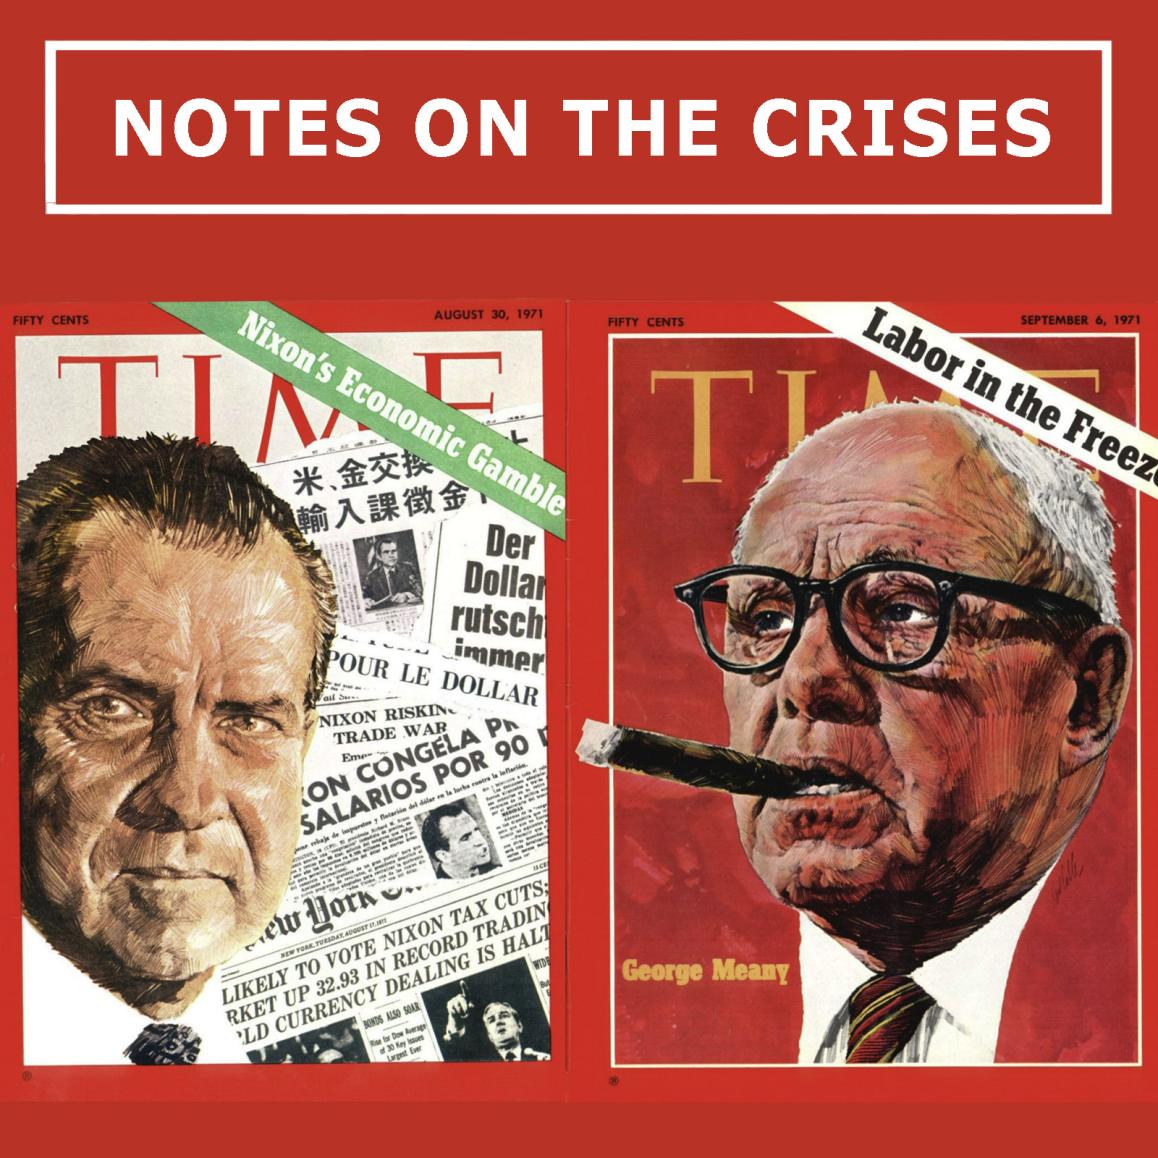 Notes On The Crises Podcast #4: Economist Daniel Mitchell On His Time As Chief Economist of Nixon’s Pay Board, the “Wages” Part of Wage and Price Controls.